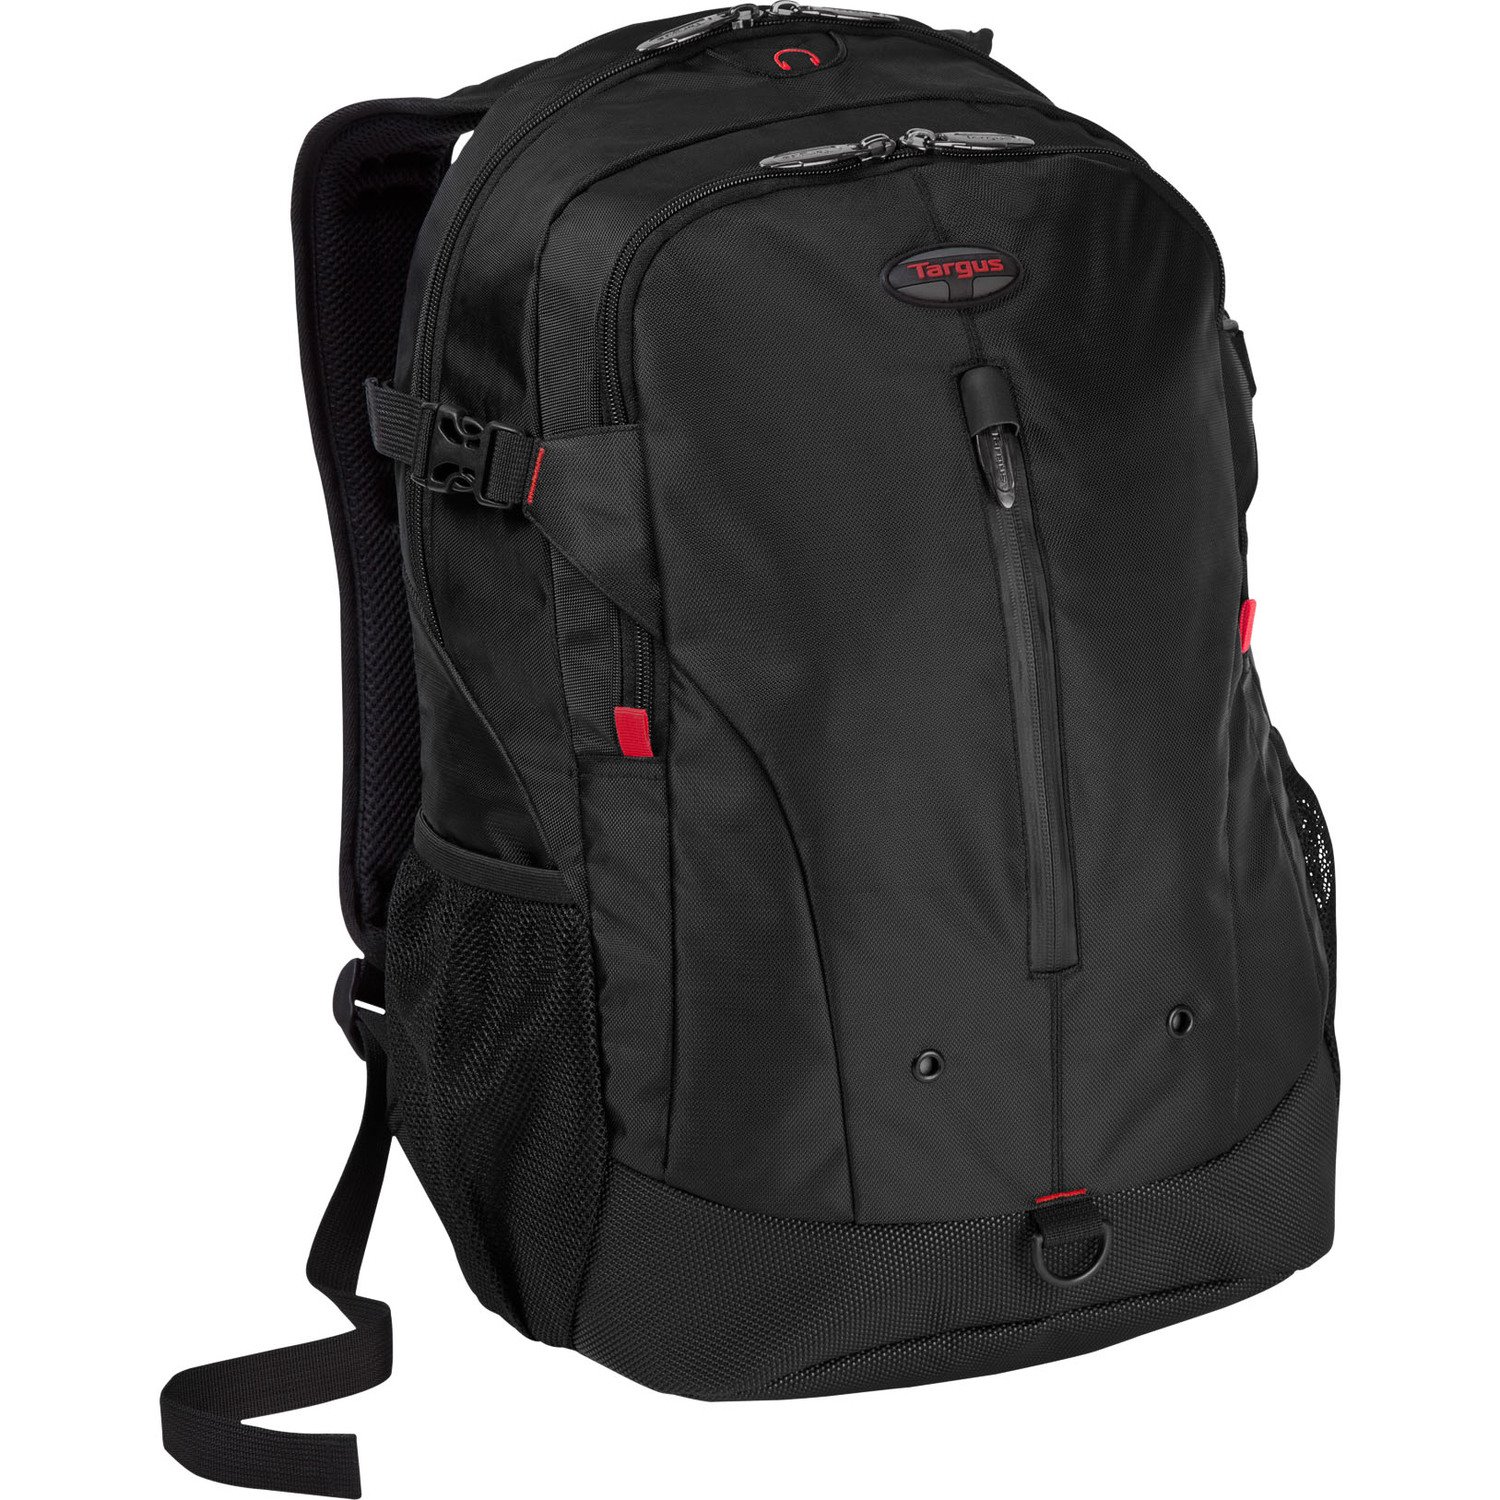 Targus Terra TSB226US Carrying Case Rugged (Backpack) for 16" Notebook - Black, Red